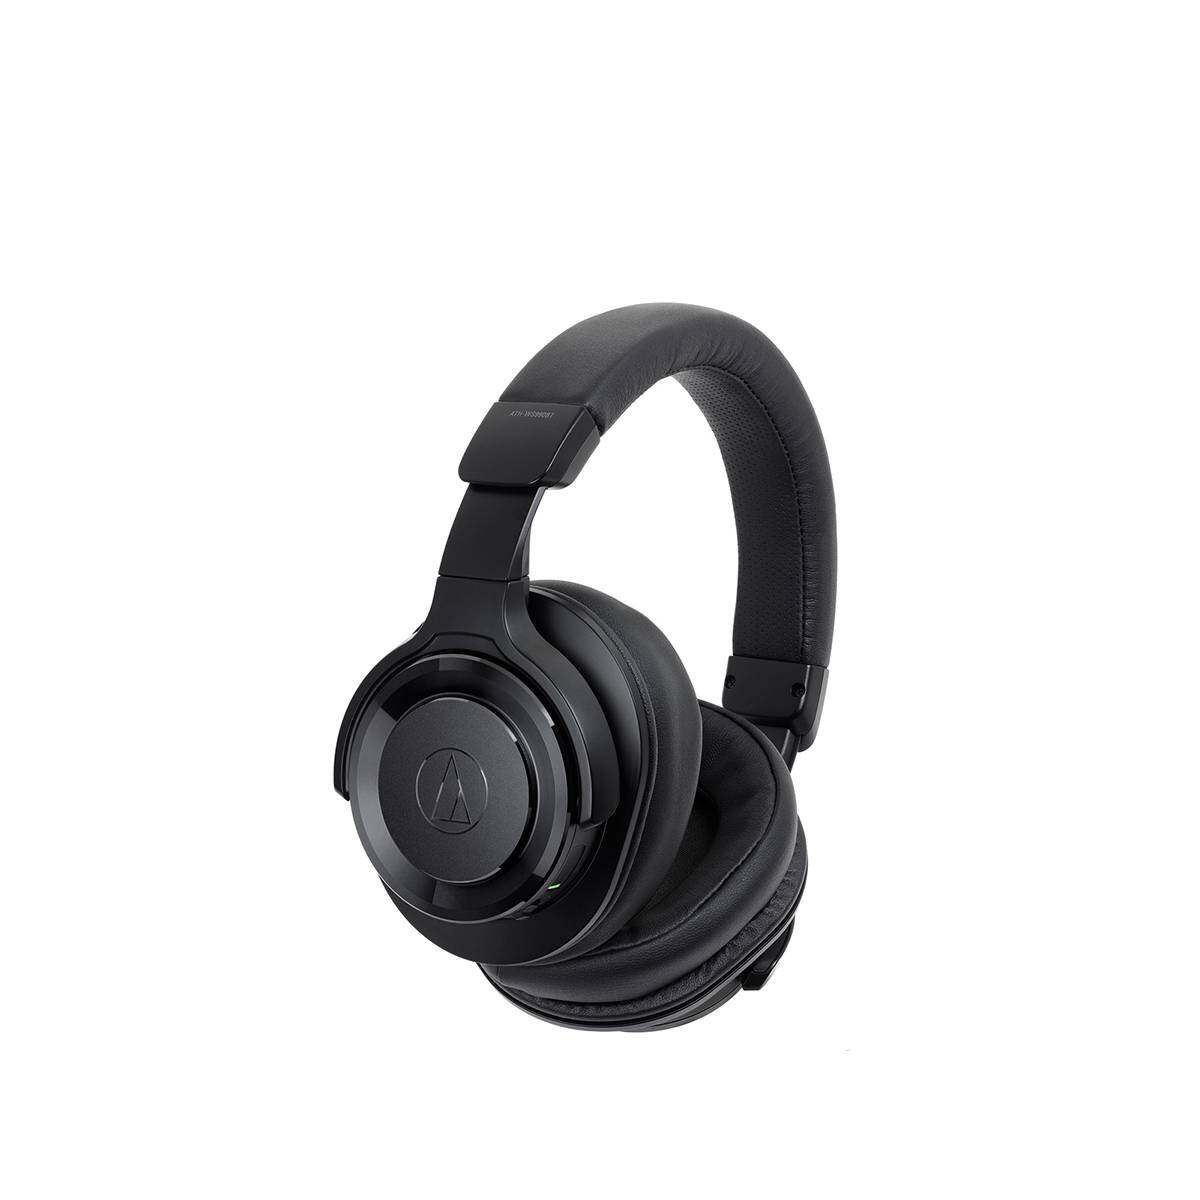 Audio-Technica Wireless Headsets ATH-WS990BT with 53mm Driver, Bluetooth 4.1, Noise Cancelling, Solid Bass, 5 - 40,000 Hz Frequency, 35 Hours Battery Life